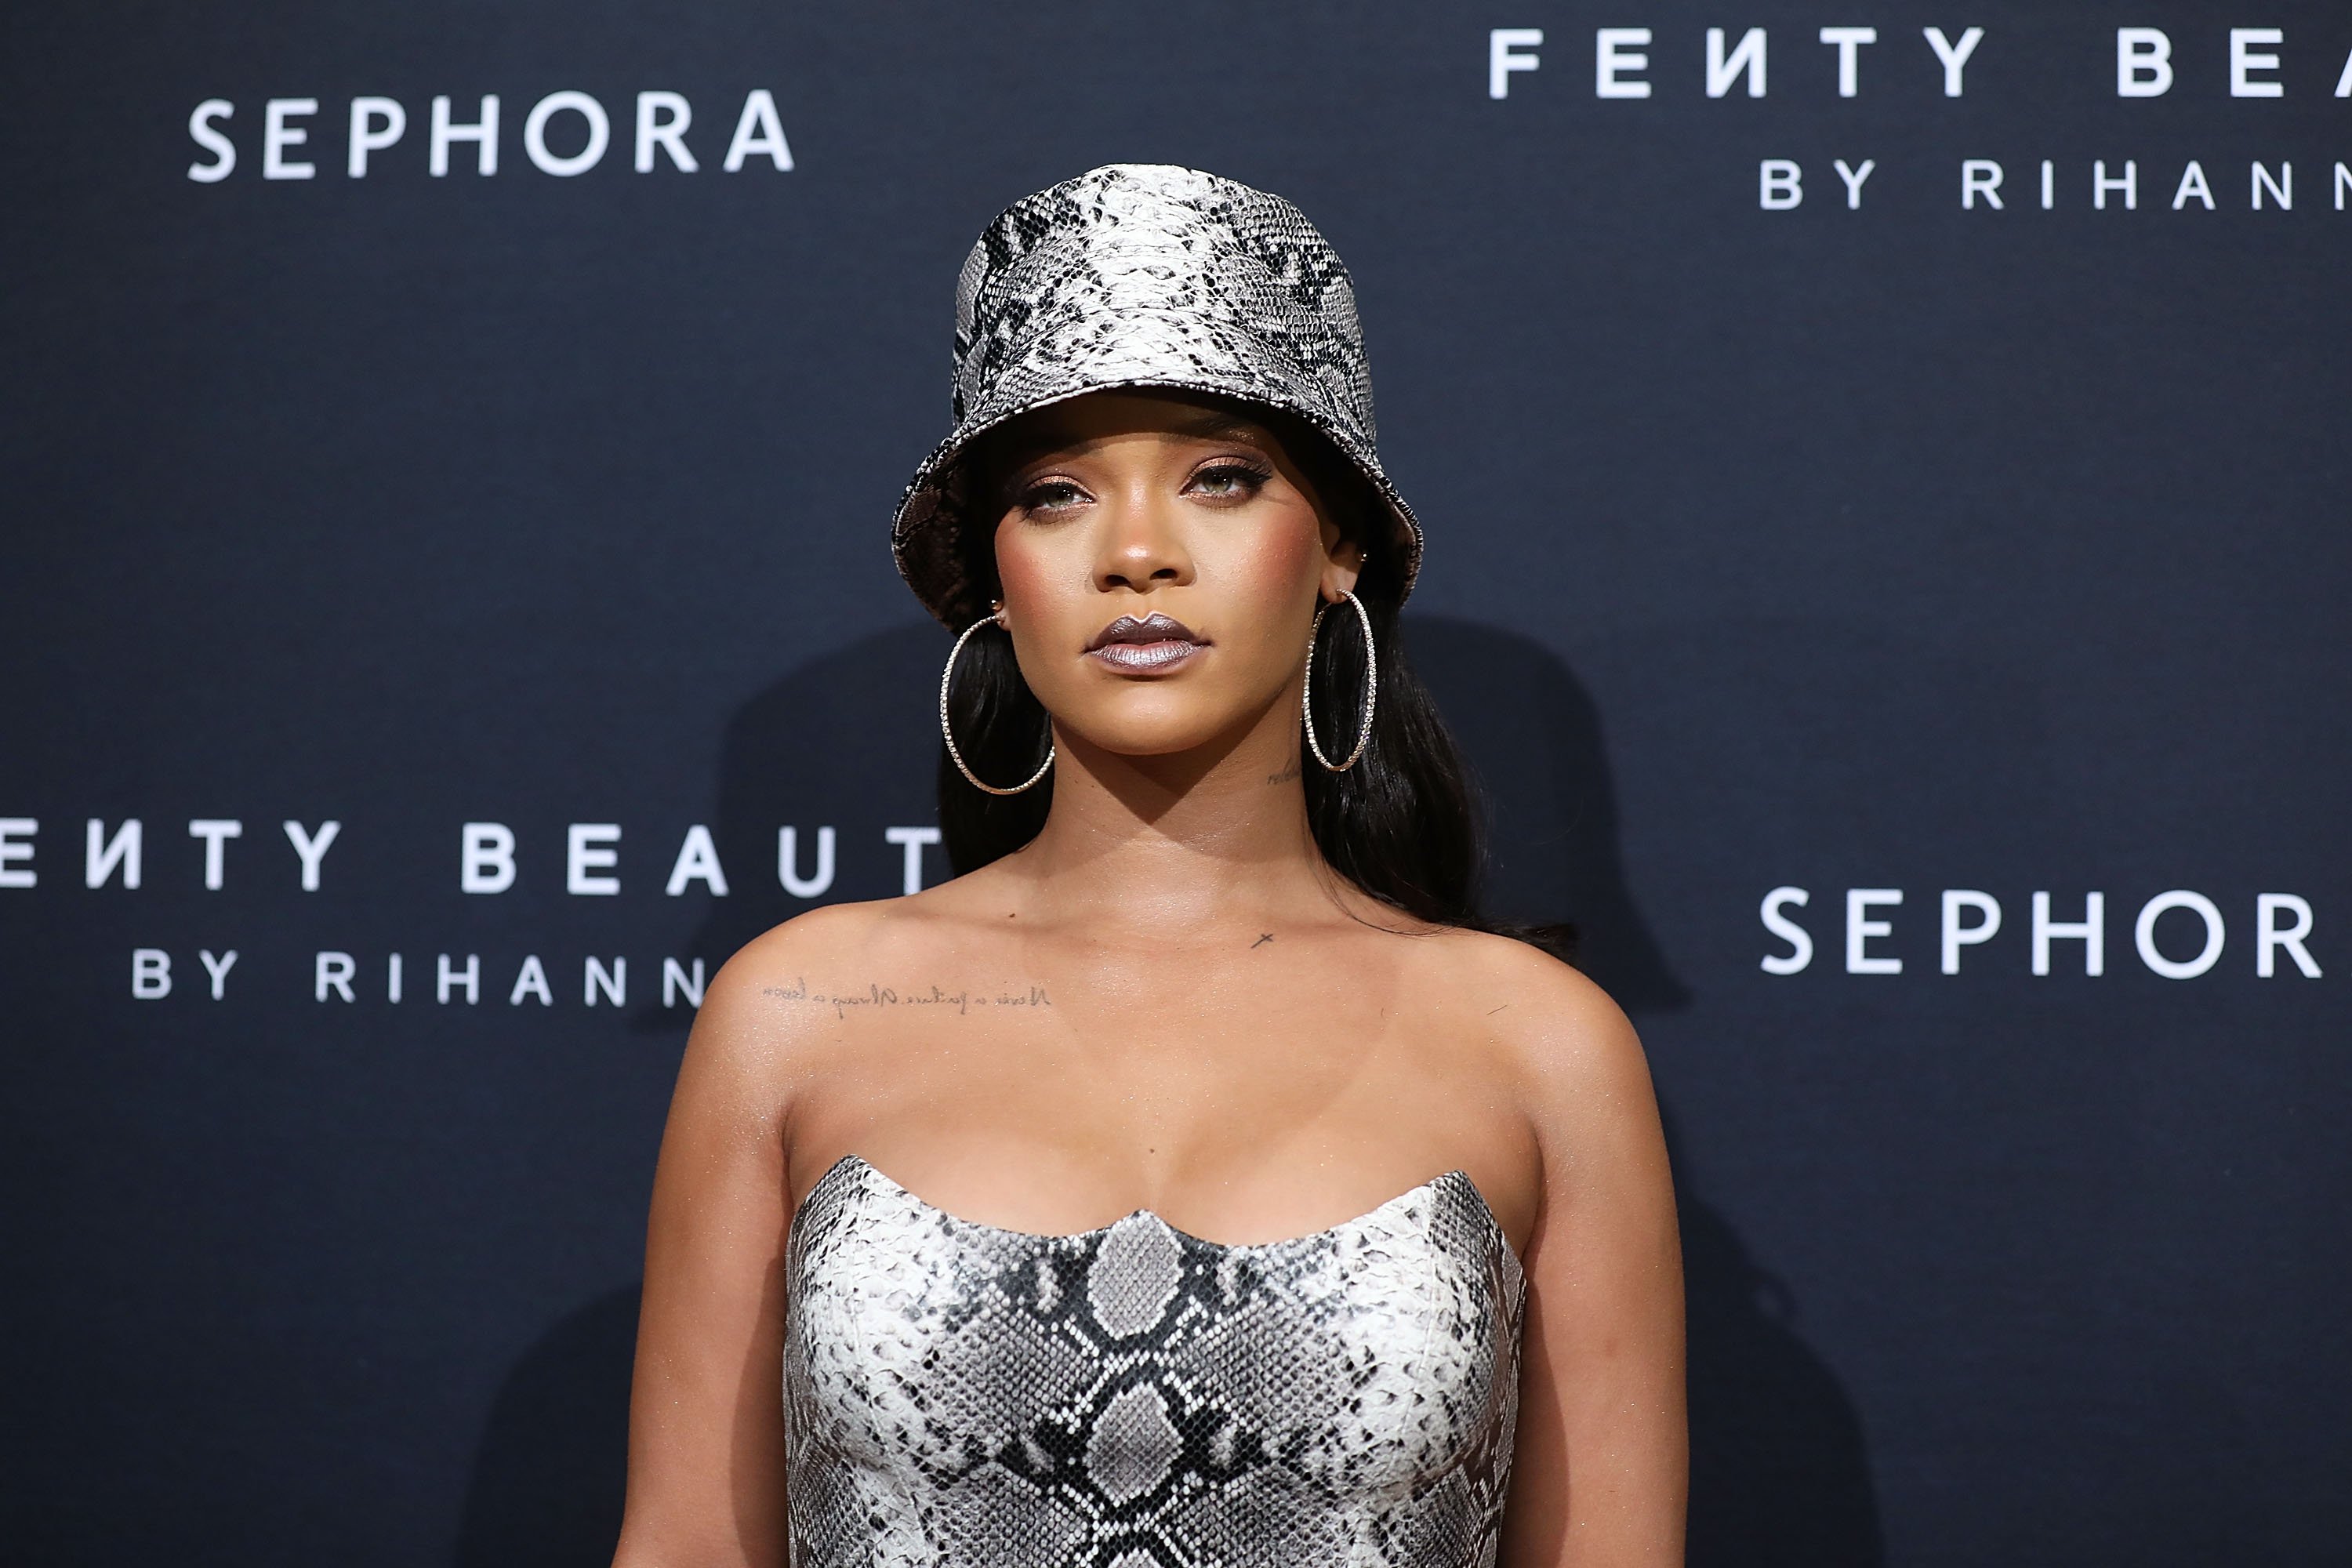 Rihanna at a Fenty promotional event in Australia | Photo: Getty Images